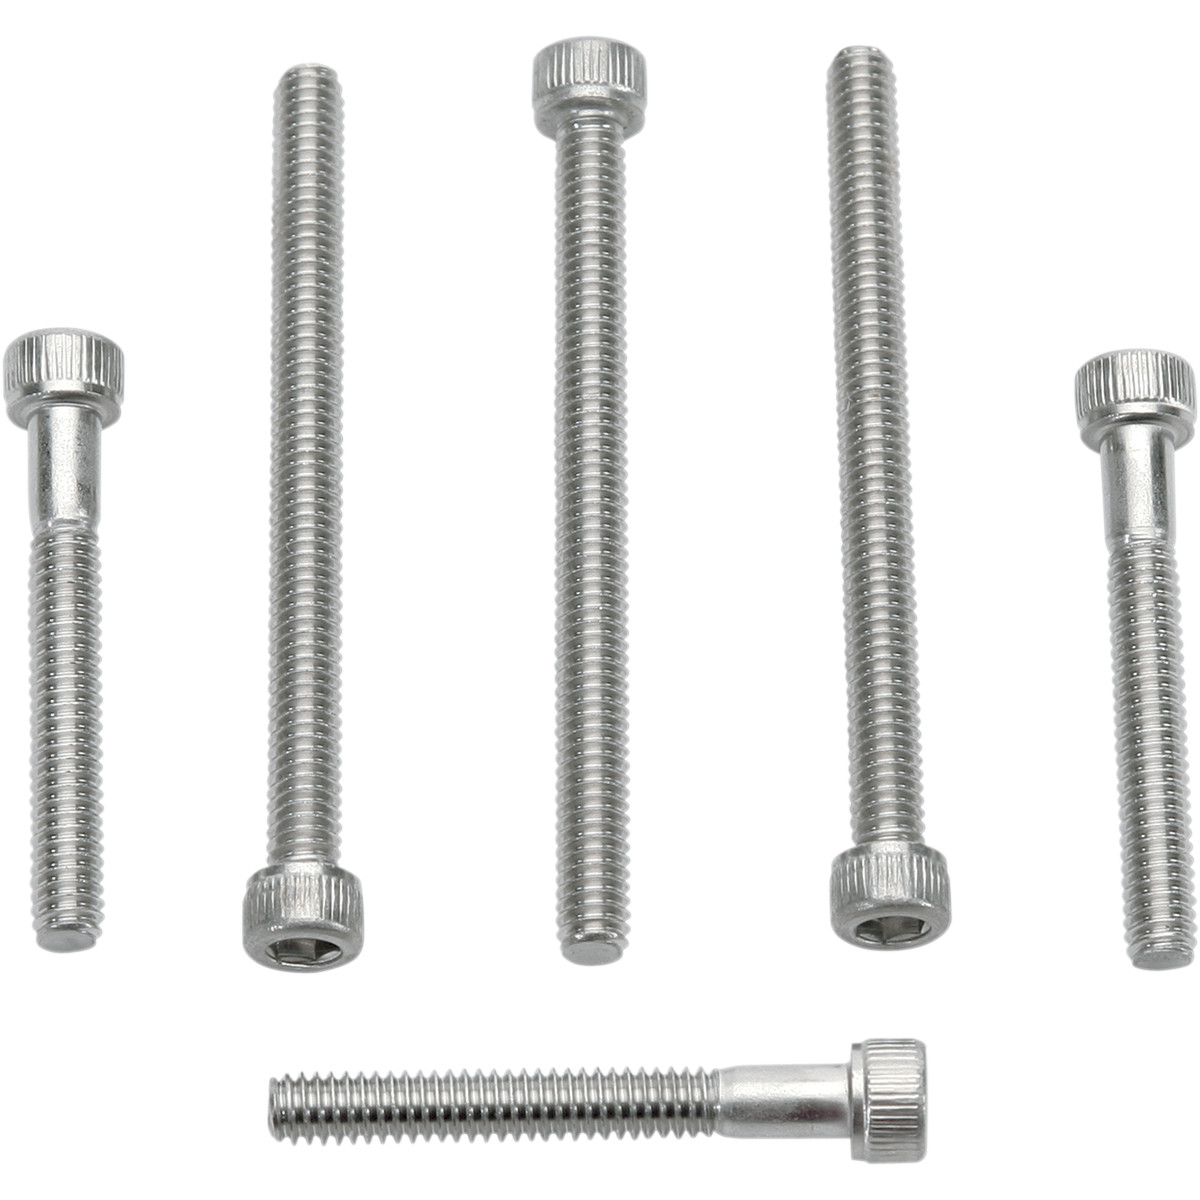 HARLEY DAVIDSON H/D BOLTS (FOR 3" DISCS) STAINLESS STEEL 3- PACK